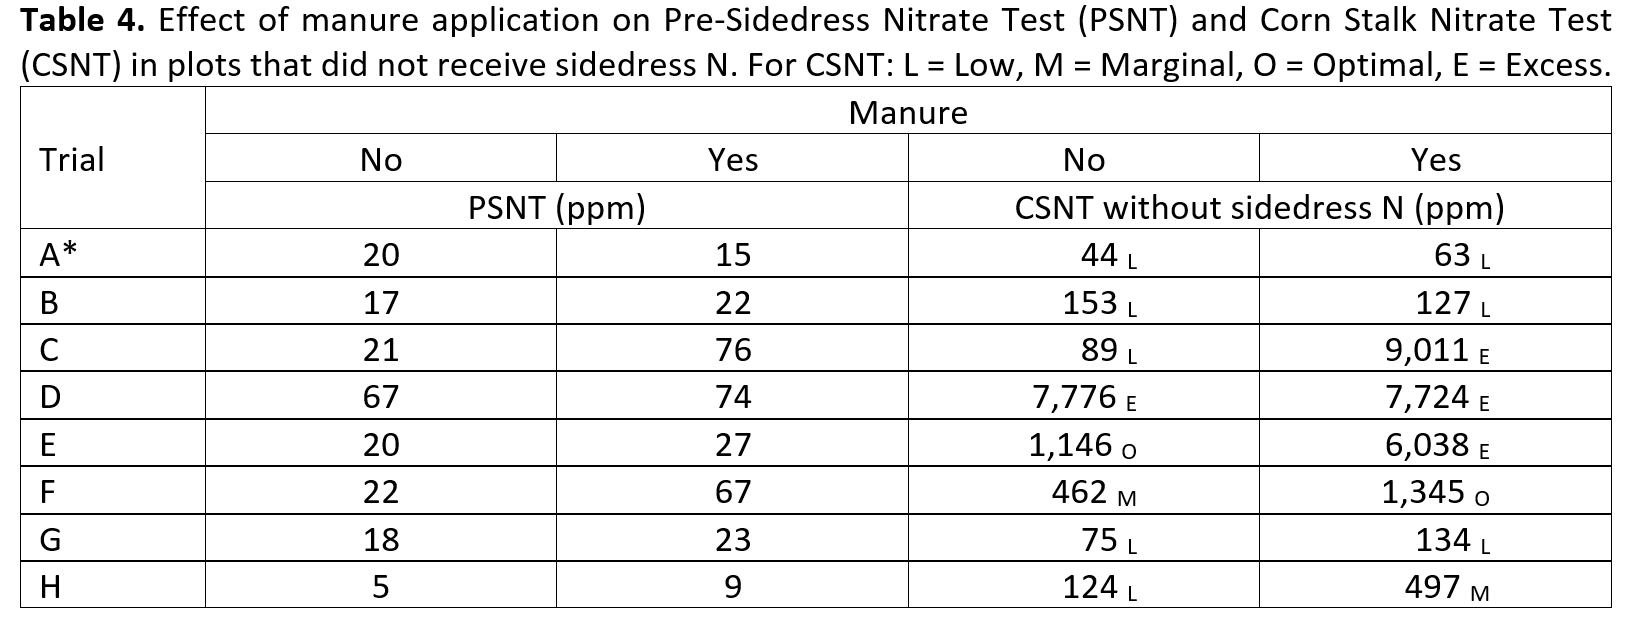 Table describing the results of the Pre-Sidedress Nitrate Test.